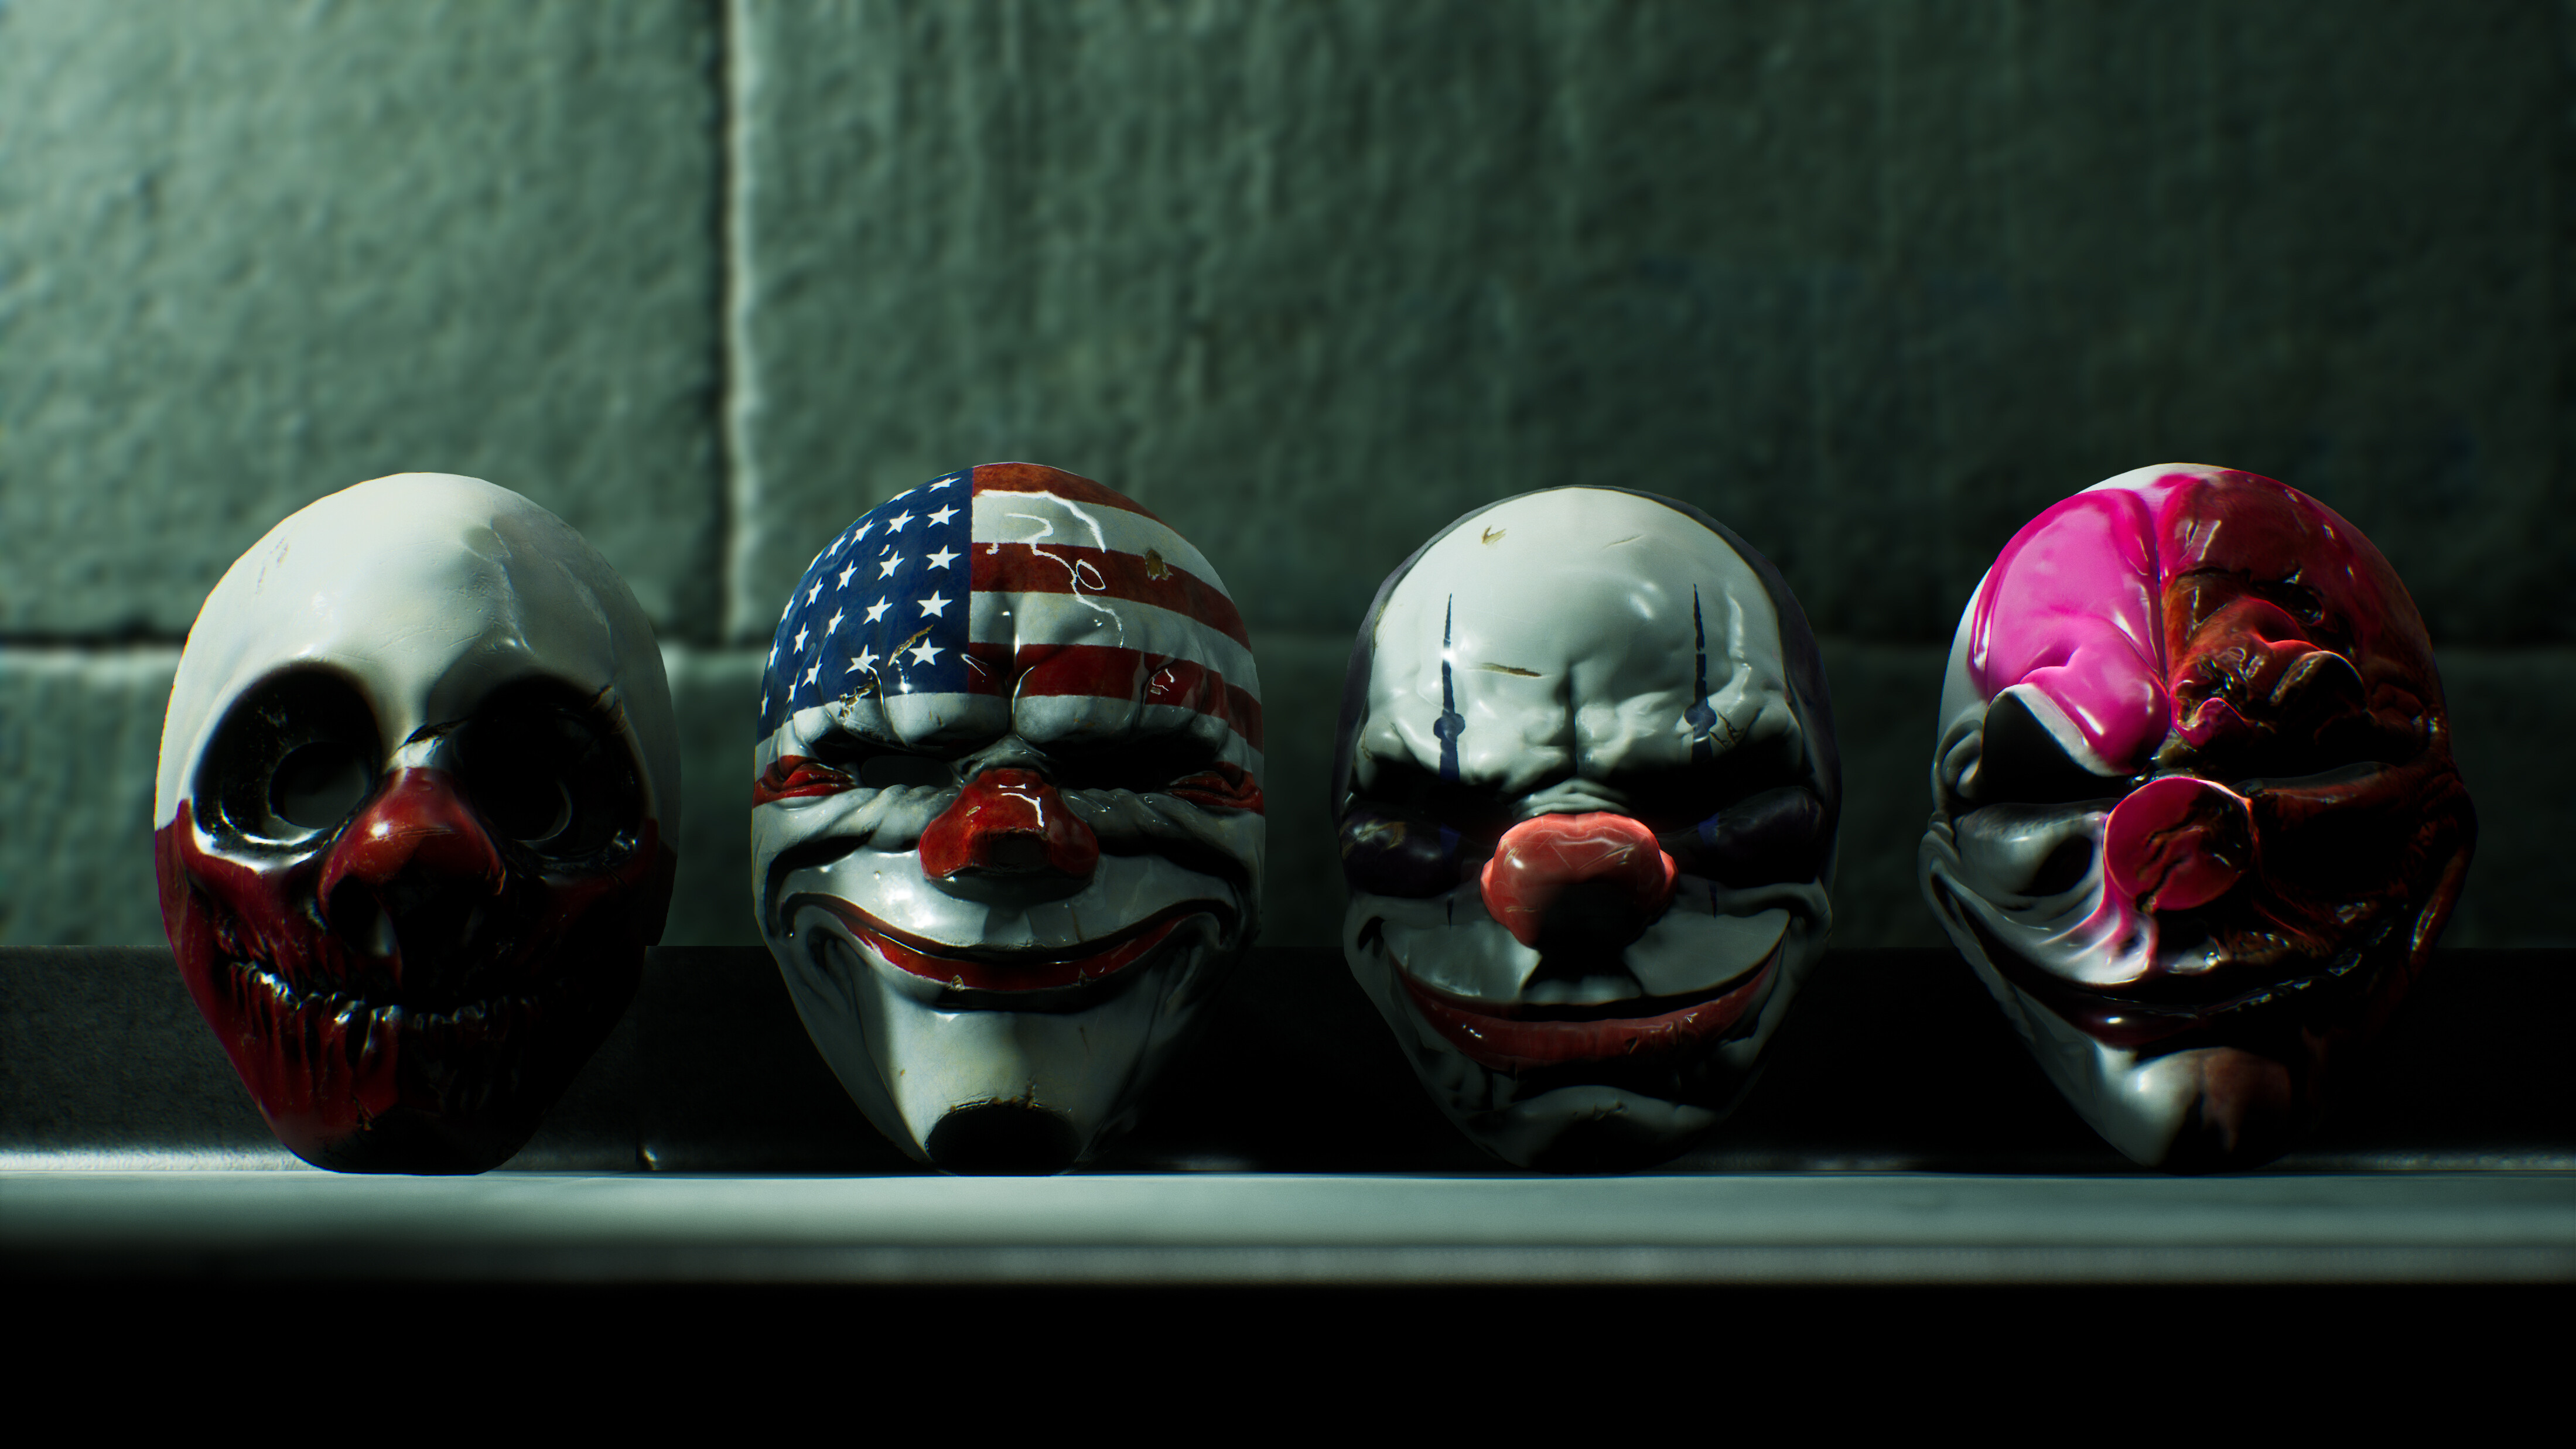 Payday 3 is going to be available on gamepass at launch! : r/paydaytheheist